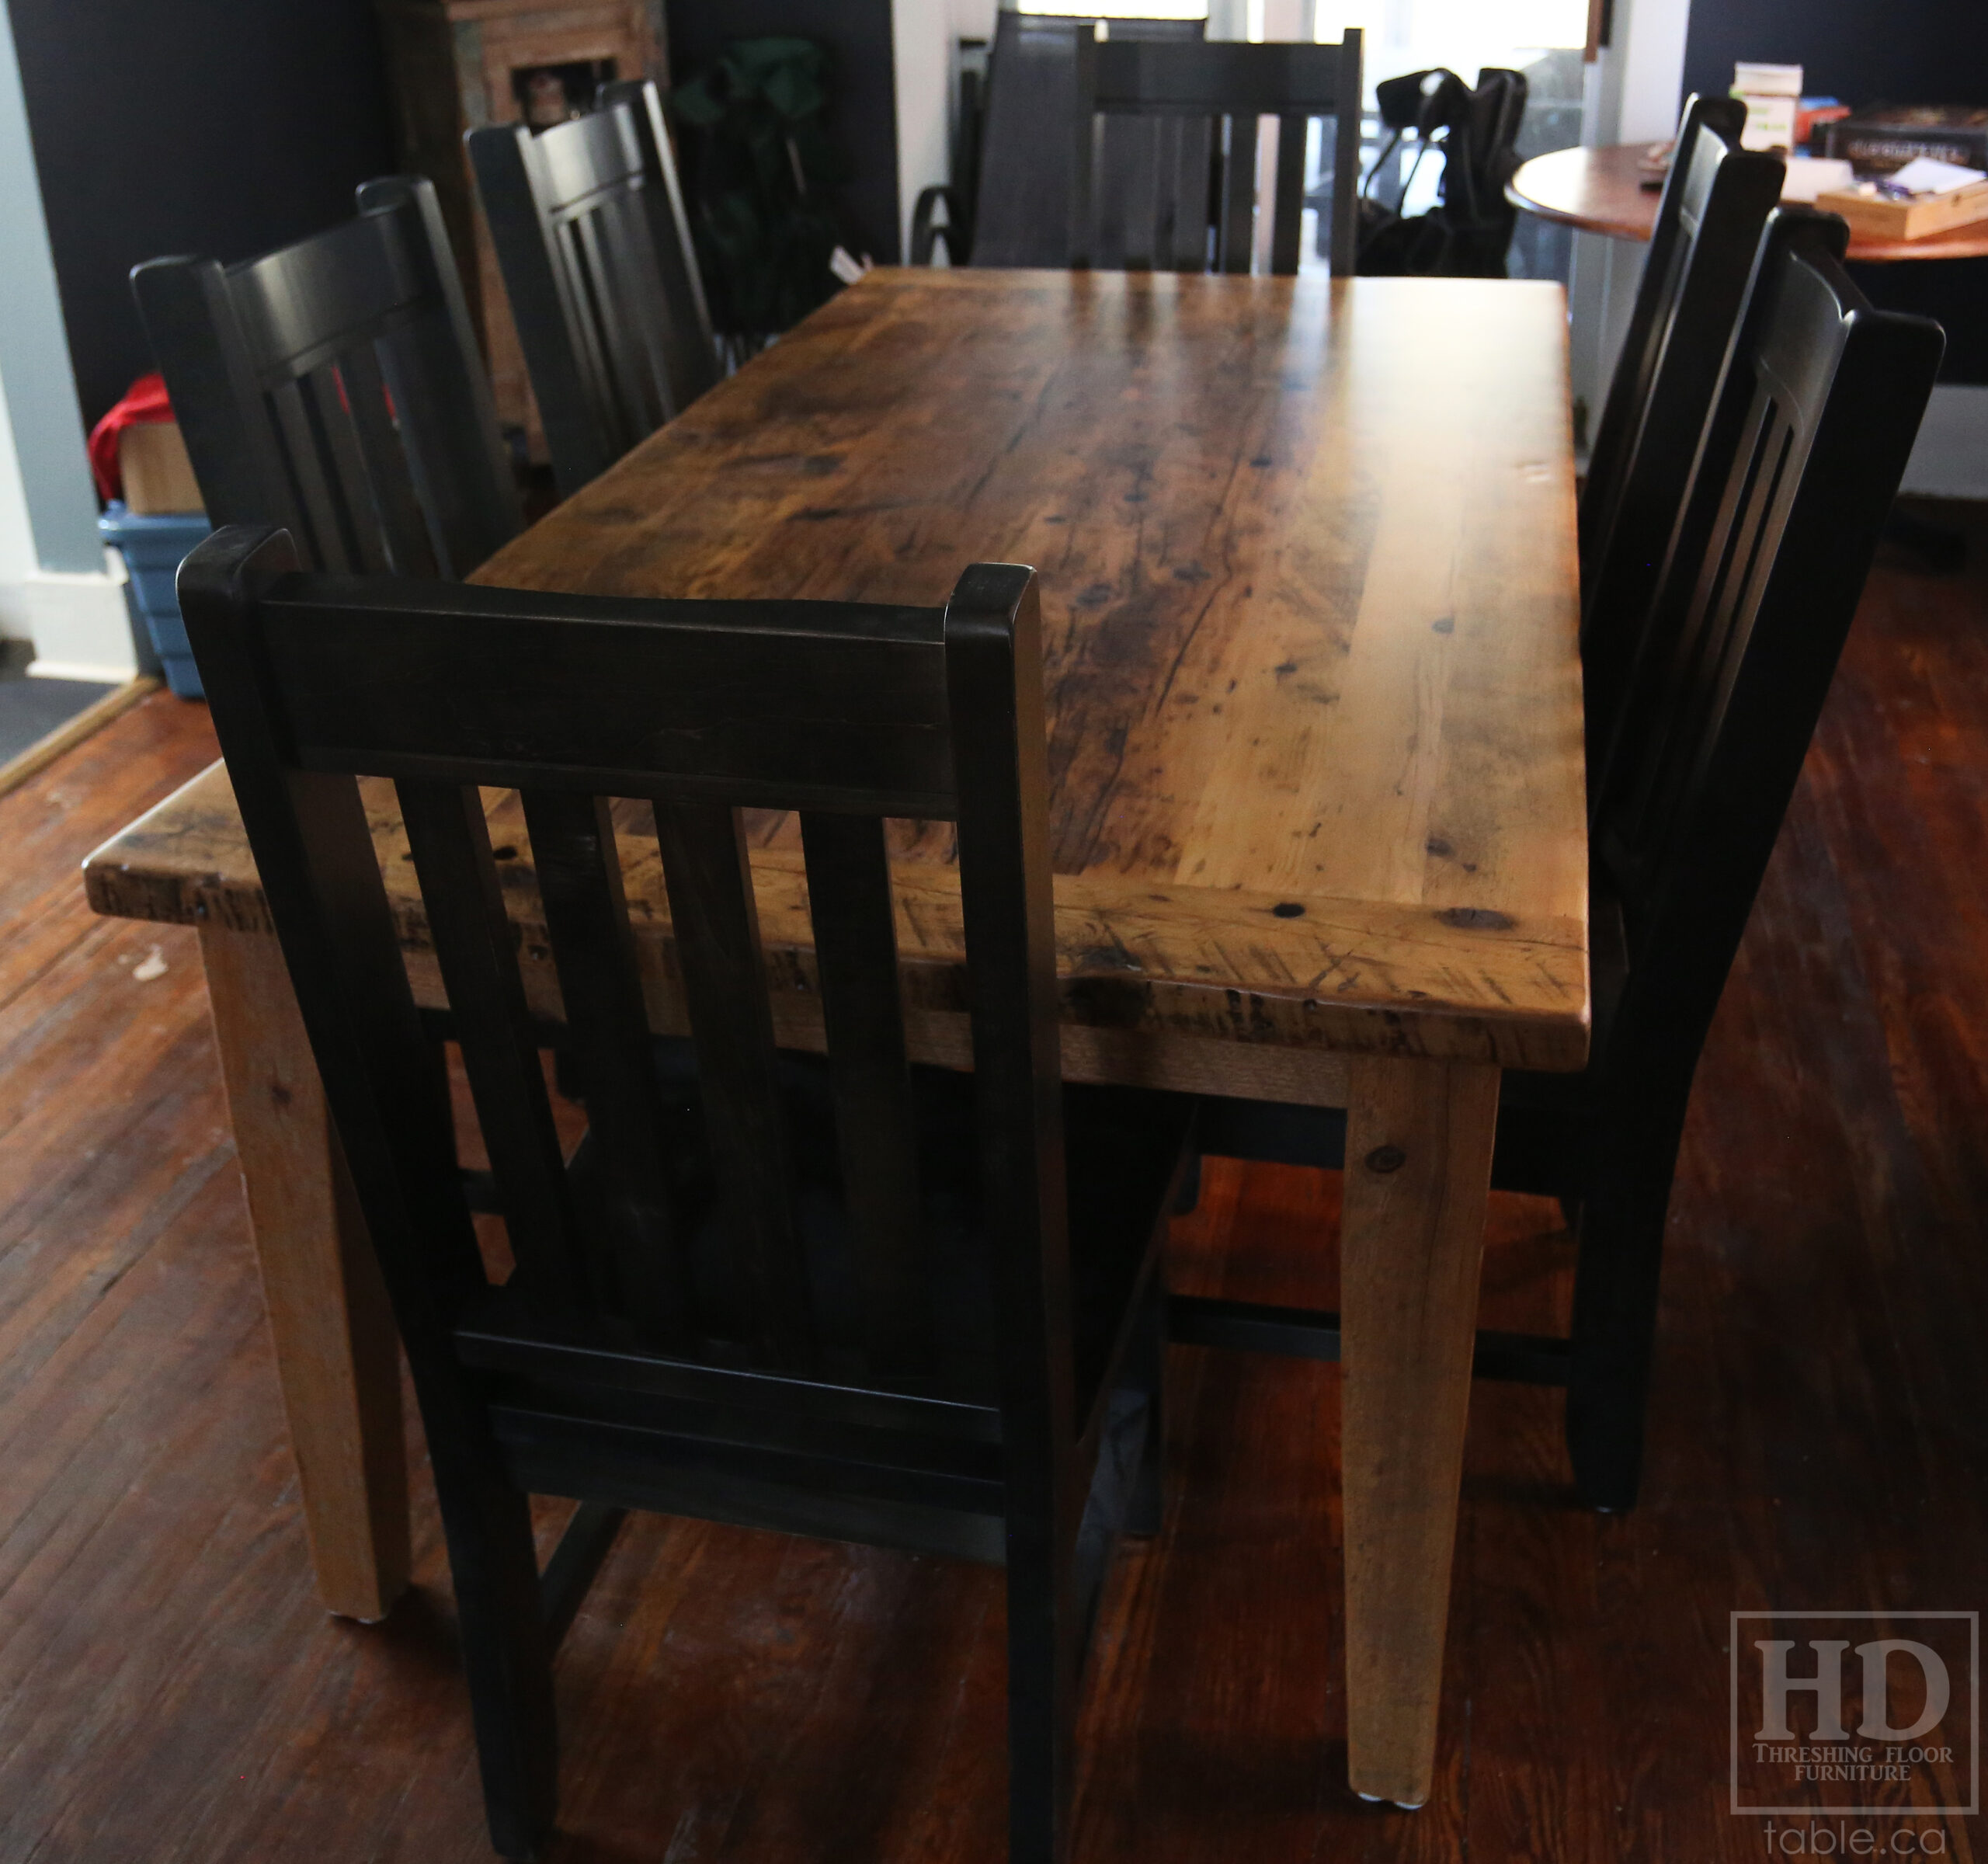 7' Reclaimed Ontario Barnwood Table we made for a London home - 42" deep - Harvest Base: Tapered Windbrace Beam Legs Option - Old Growth Hemlock Threshing Floor Construction - Original edges & distressing maintained - Greytone Option - Premium epoxy + matte polyurethane finish - 6 Strongback Chairs / Wormy Maple - www.table.ca